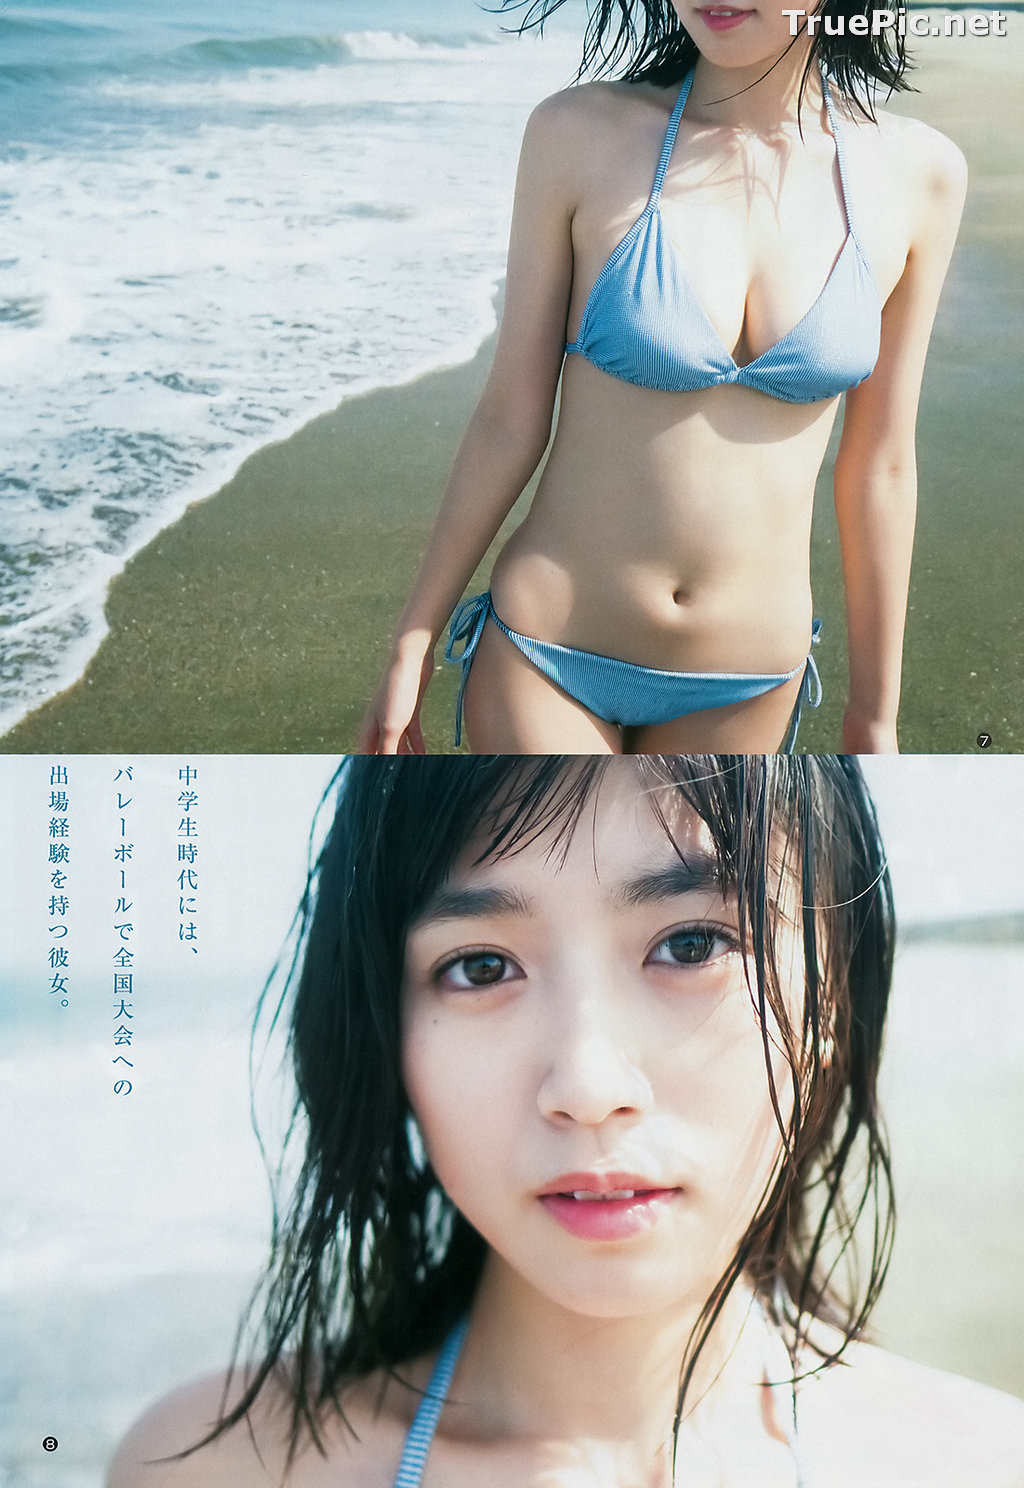 ImageJapanese Gravure Idol and Actress - Kitamuki Miyu (北向珠夕) - Sexy Picture Collection 2020 - TruePic.net - Picture-150